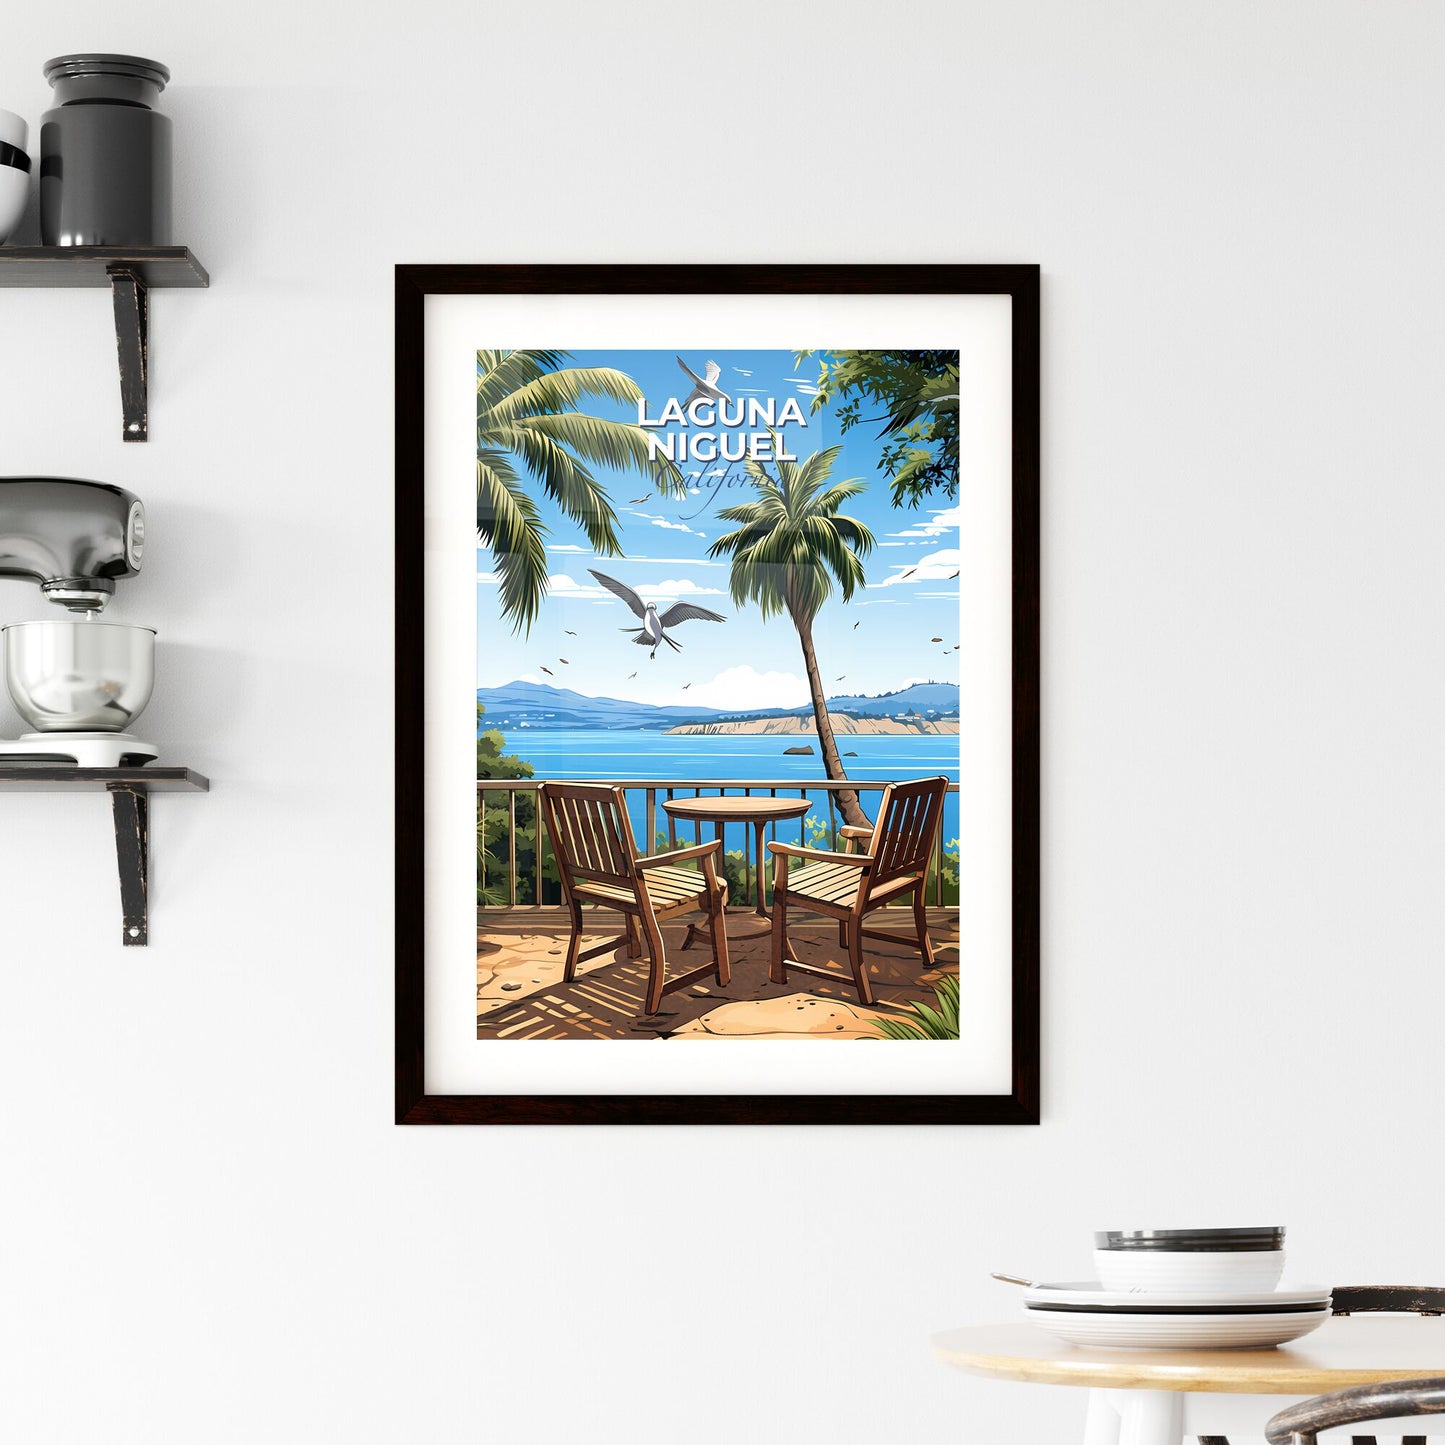 Laguna Niguel, California, A Poster of a deck with chairs and table and a bird flying over the water Default Title